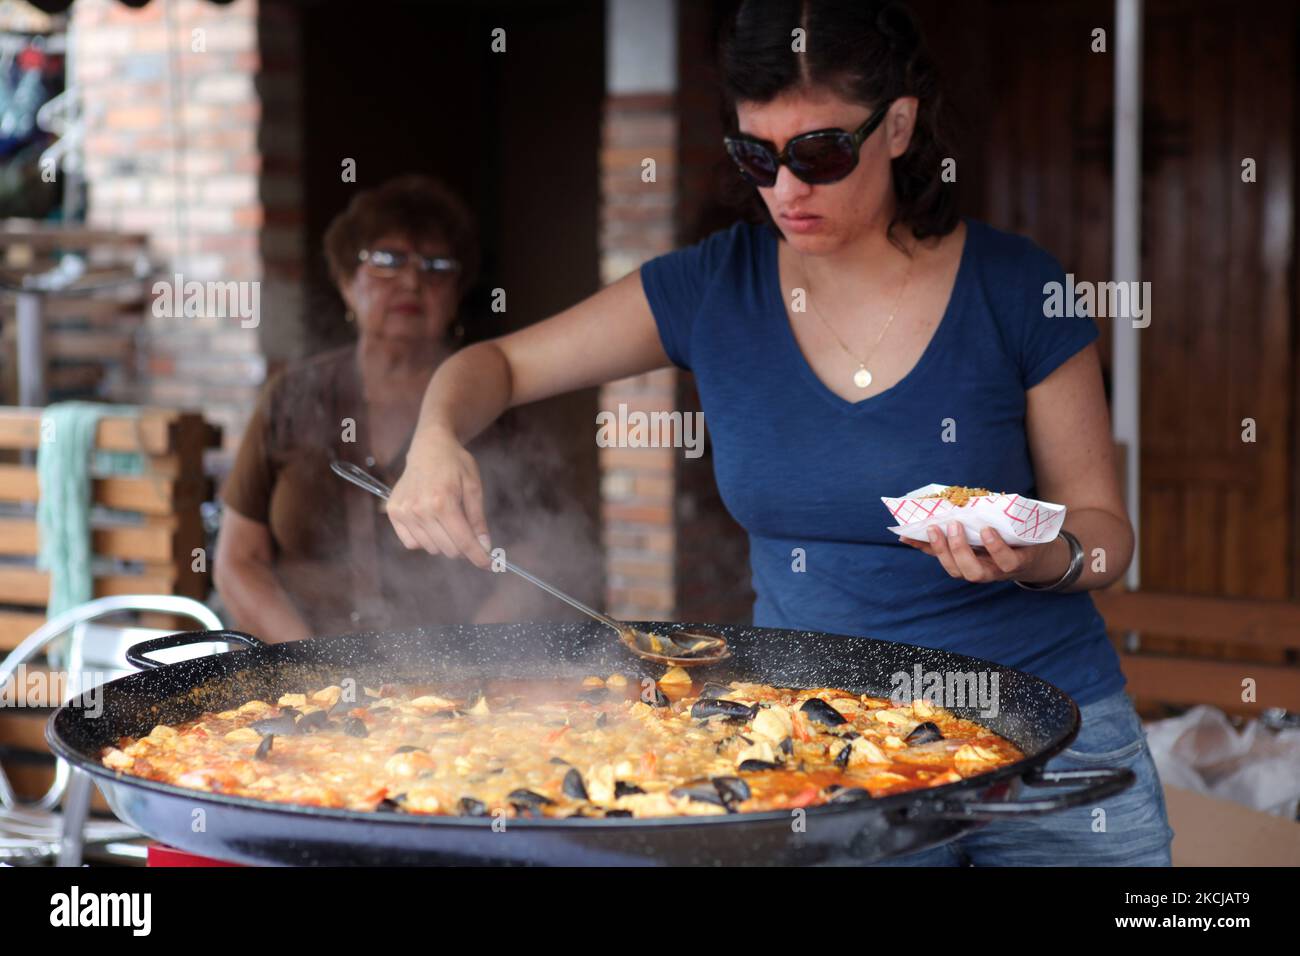 https://c8.alamy.com/comp/2KCJAT9/spanish-woman-serves-paella-from-a-large-pot-outside-a-spanish-restaurant-in-toronto-ontario-canada-on-august-07-2010-photo-by-creative-touch-imaging-ltdnurphoto-2KCJAT9.jpg